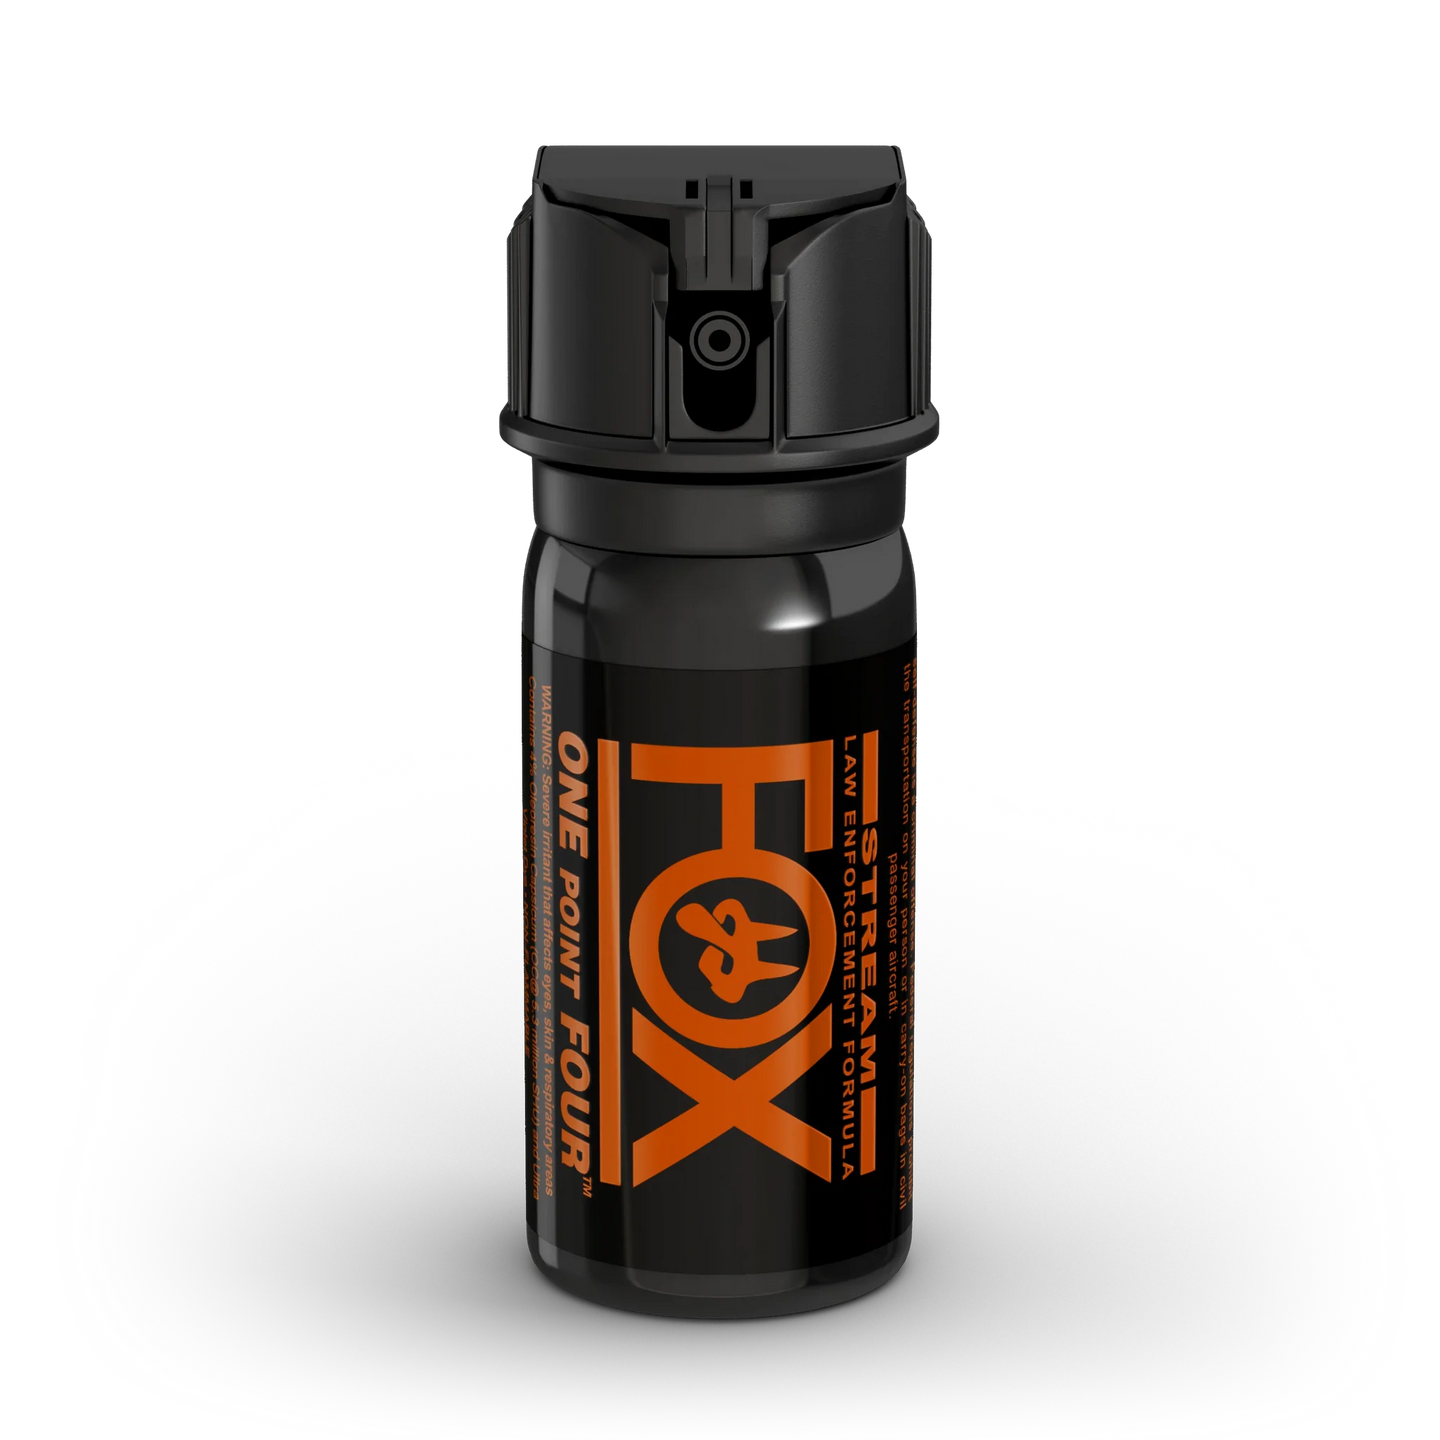 Fox Labs' One Point Four® Hottest Pepper Spray with 1.4 MC plus UV Marking Dye, 2 Ounce Stream